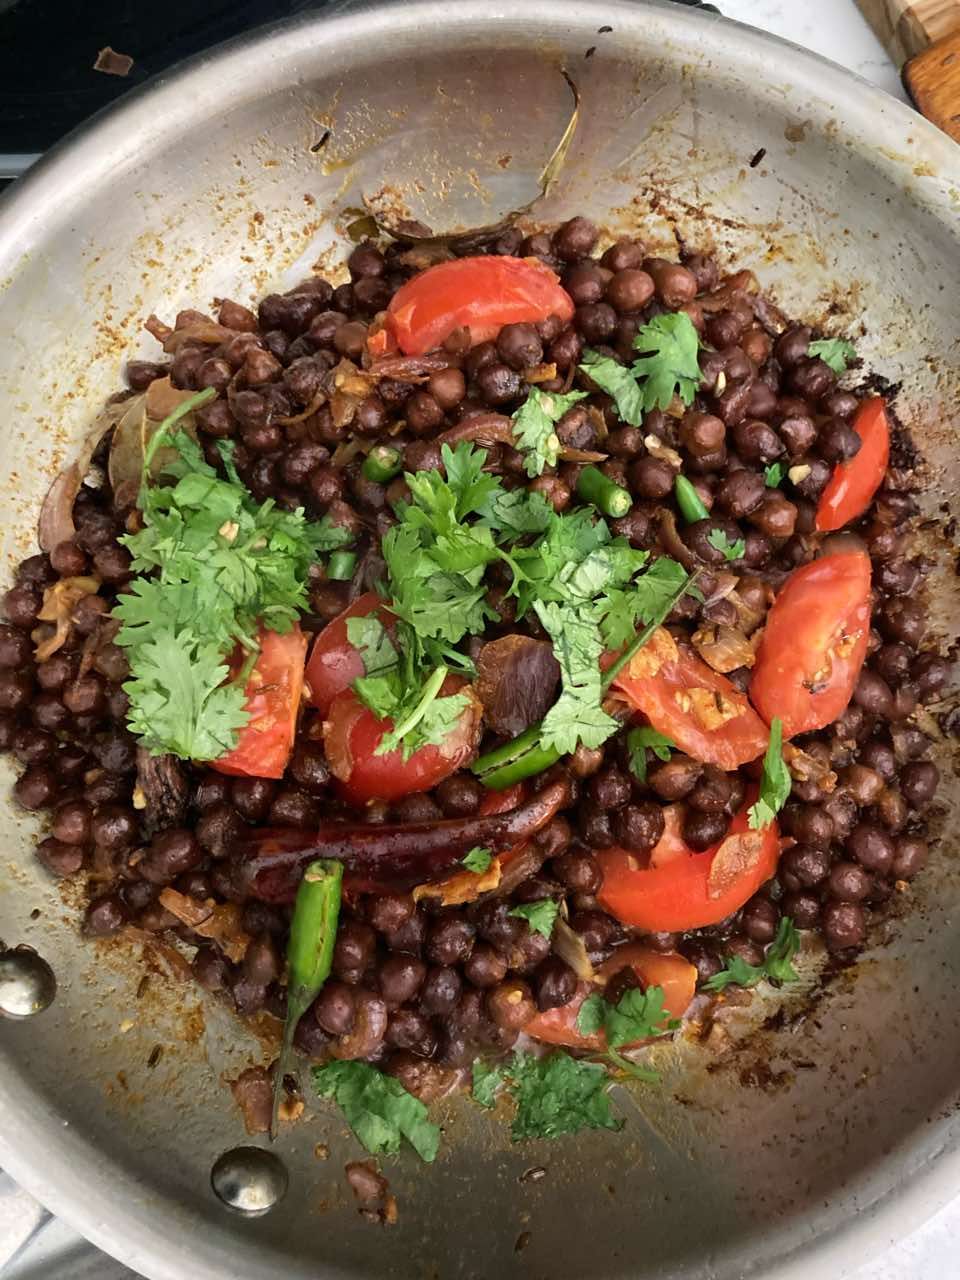 Sauteed chickpeas finished dish